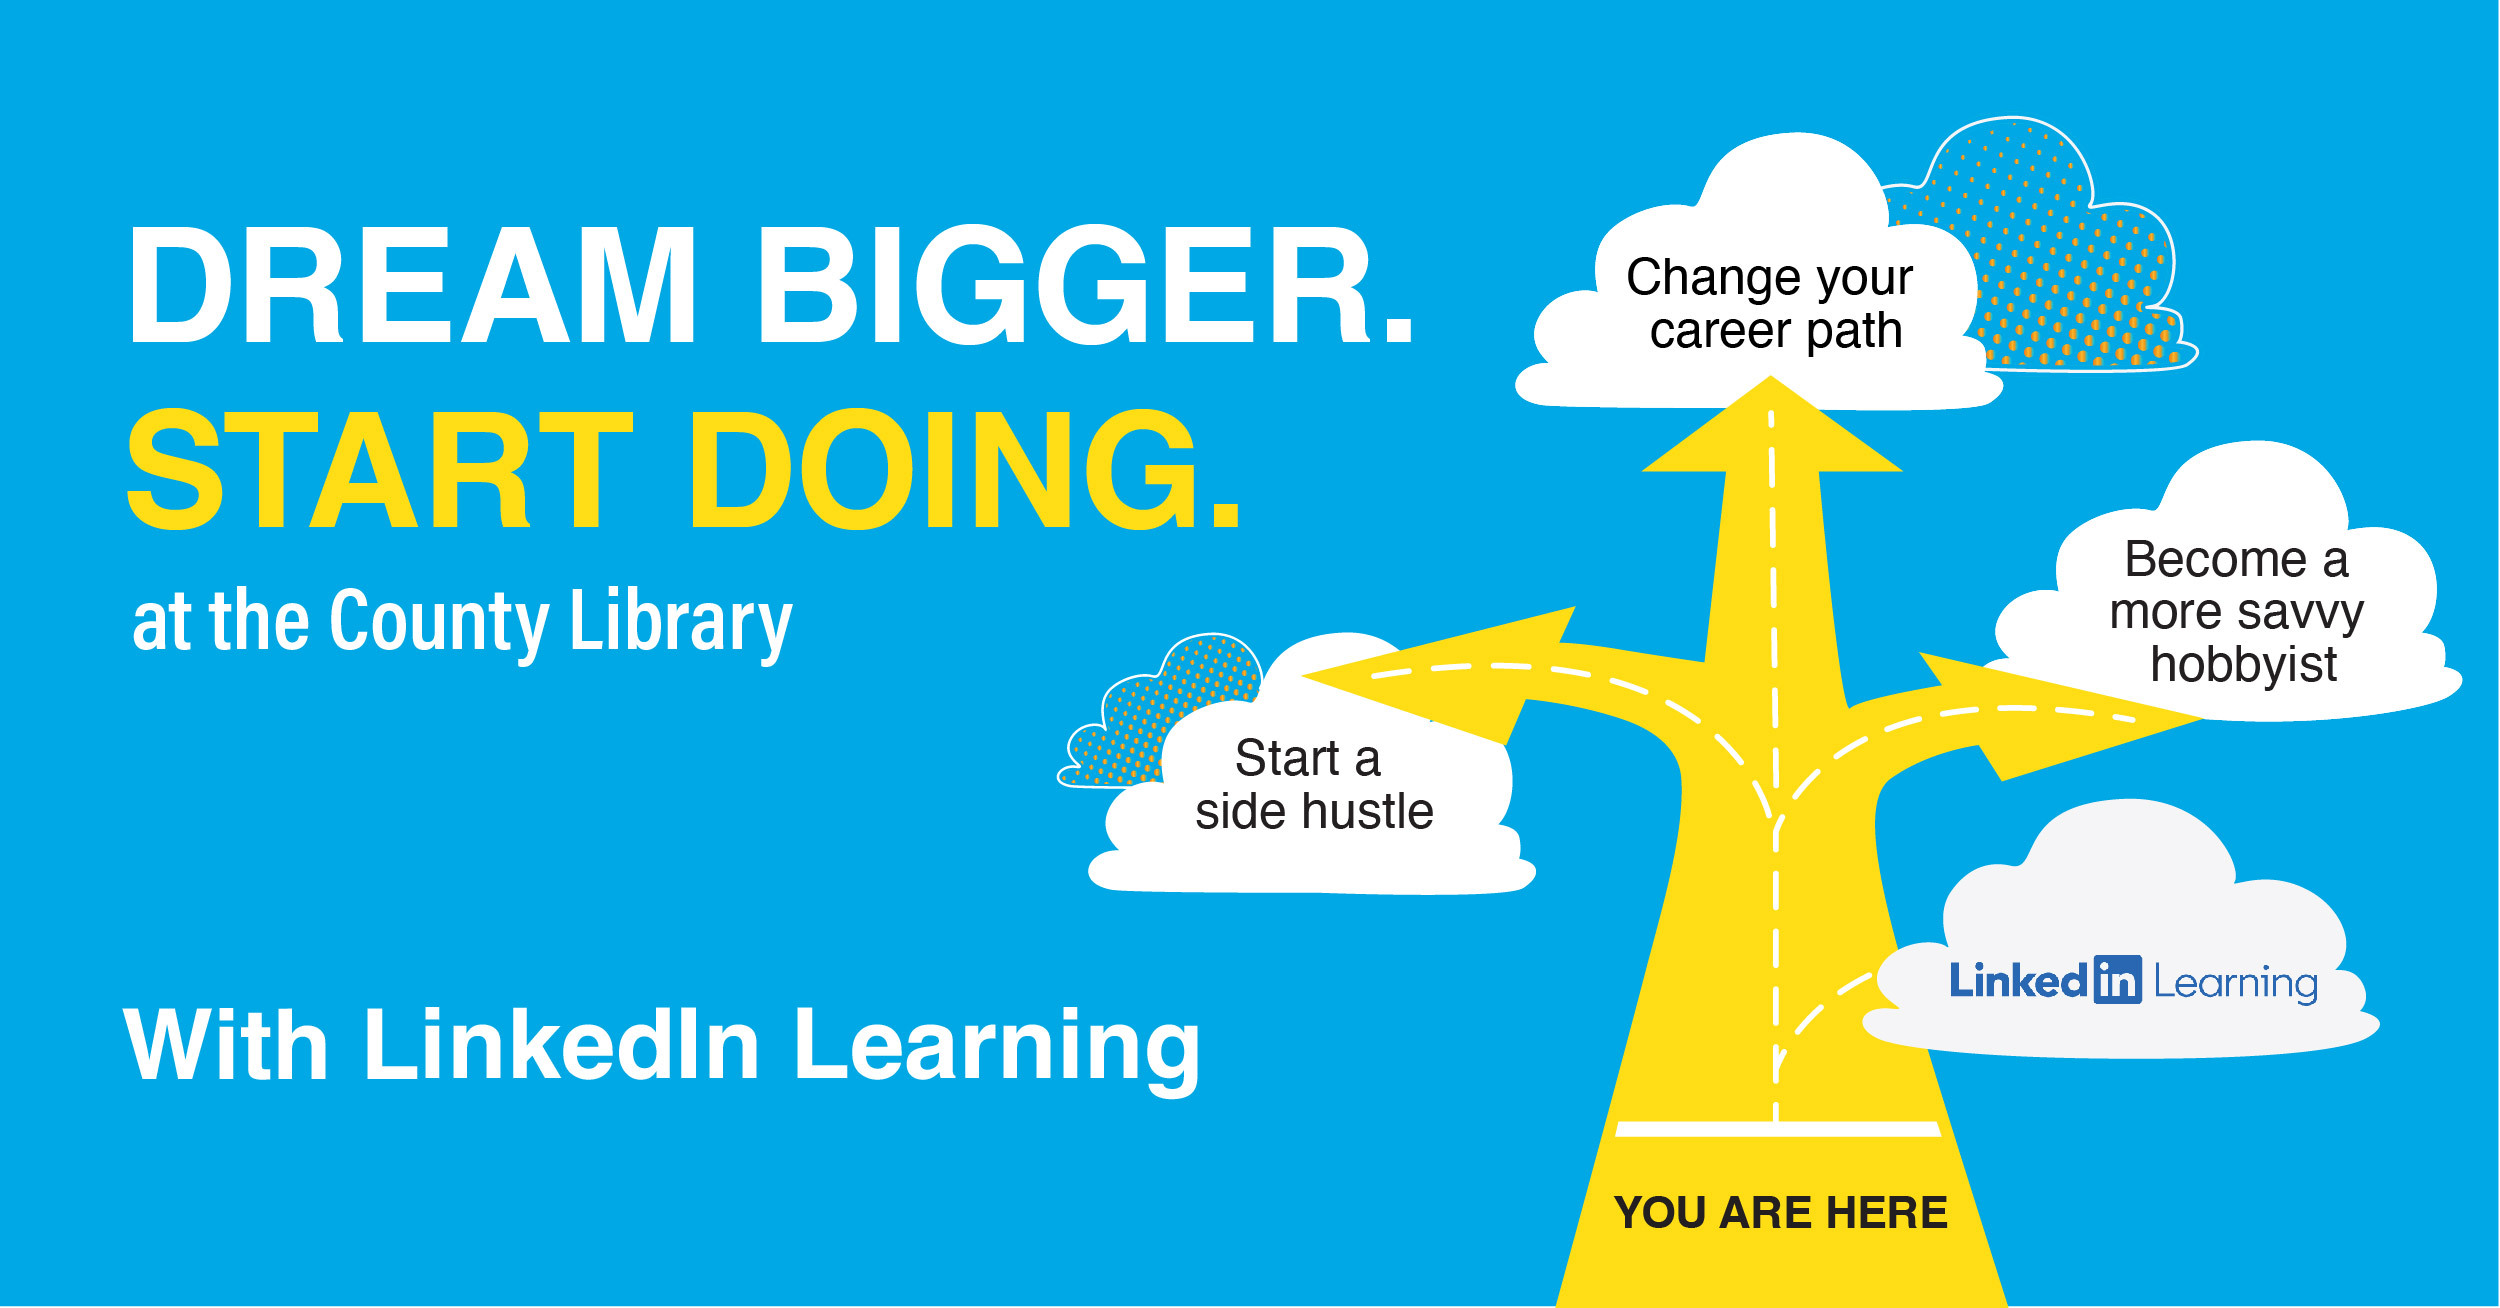 Dream Bigger with LinkedIn Learning through the County Library